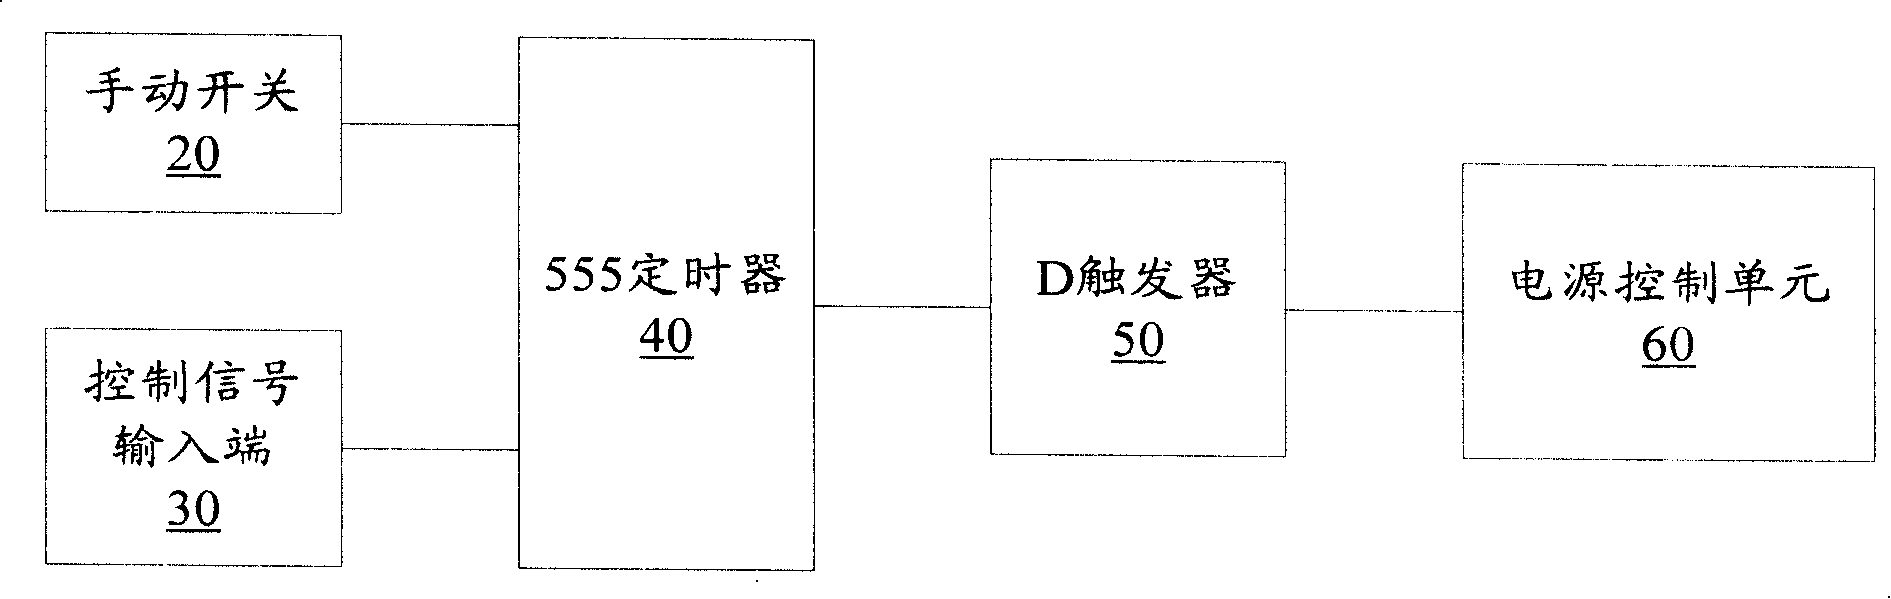 Switch control method for DC stabilized voltage power supply